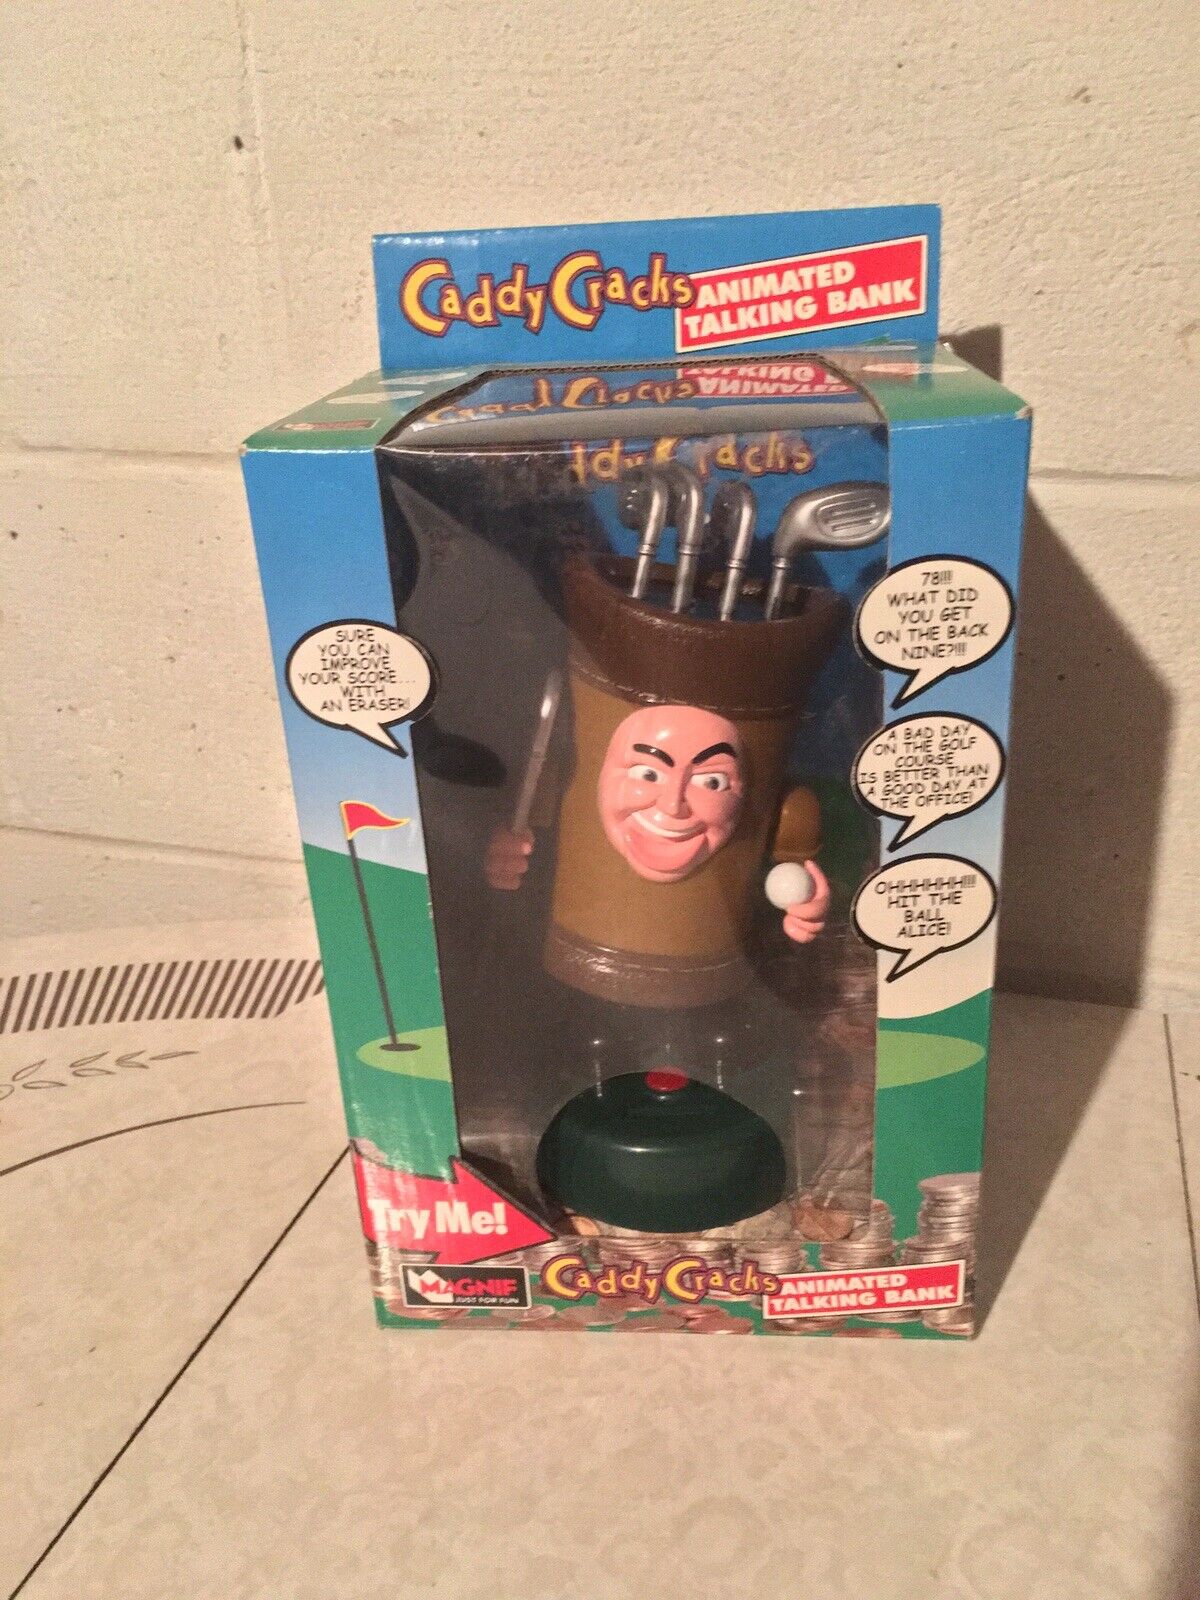 Golfing Caddy Cracks Animated Talking Bank Funny Golf Gift New In Box